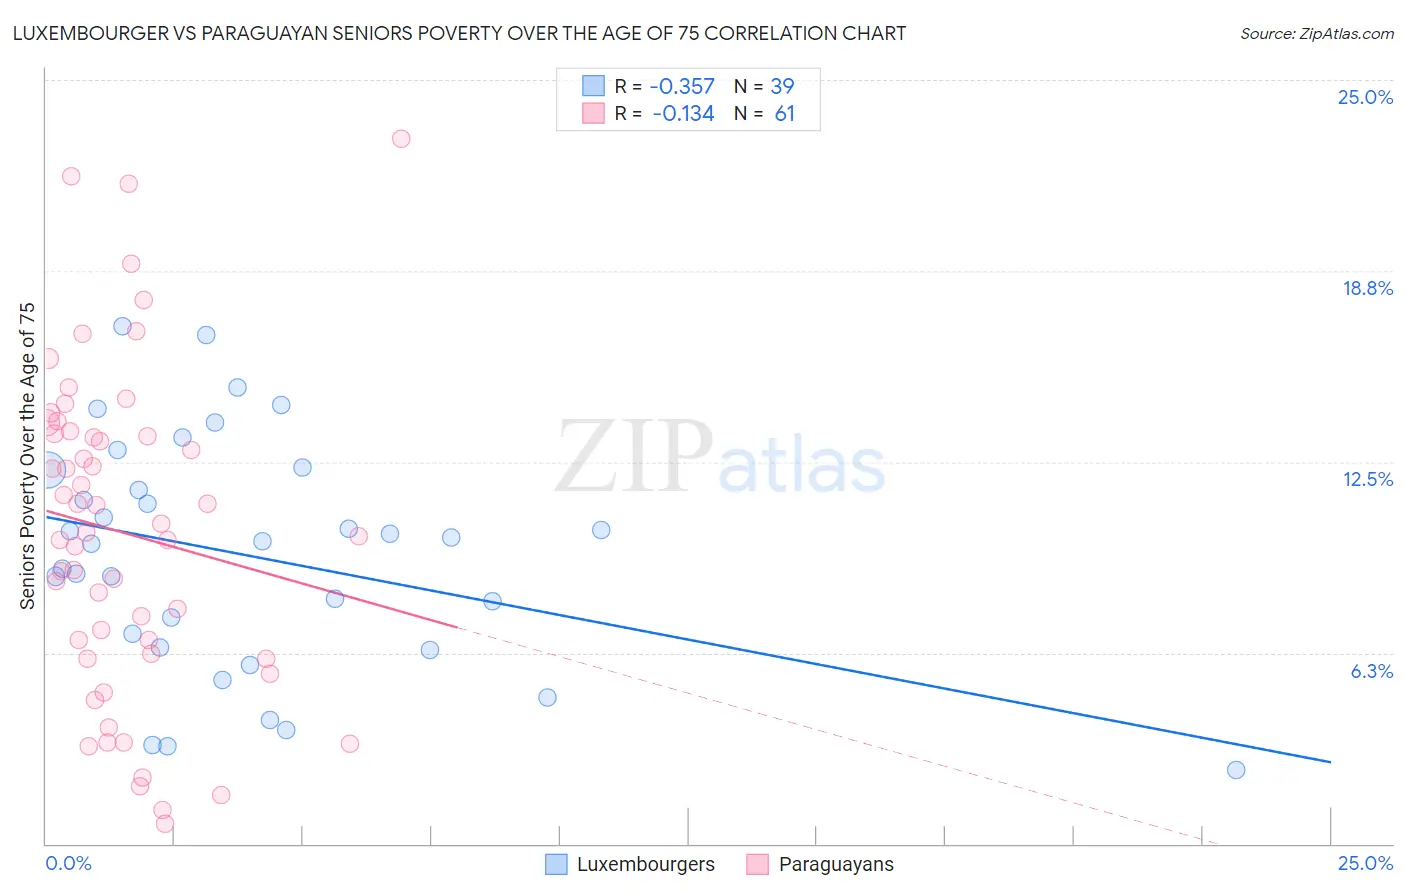 Luxembourger vs Paraguayan Seniors Poverty Over the Age of 75